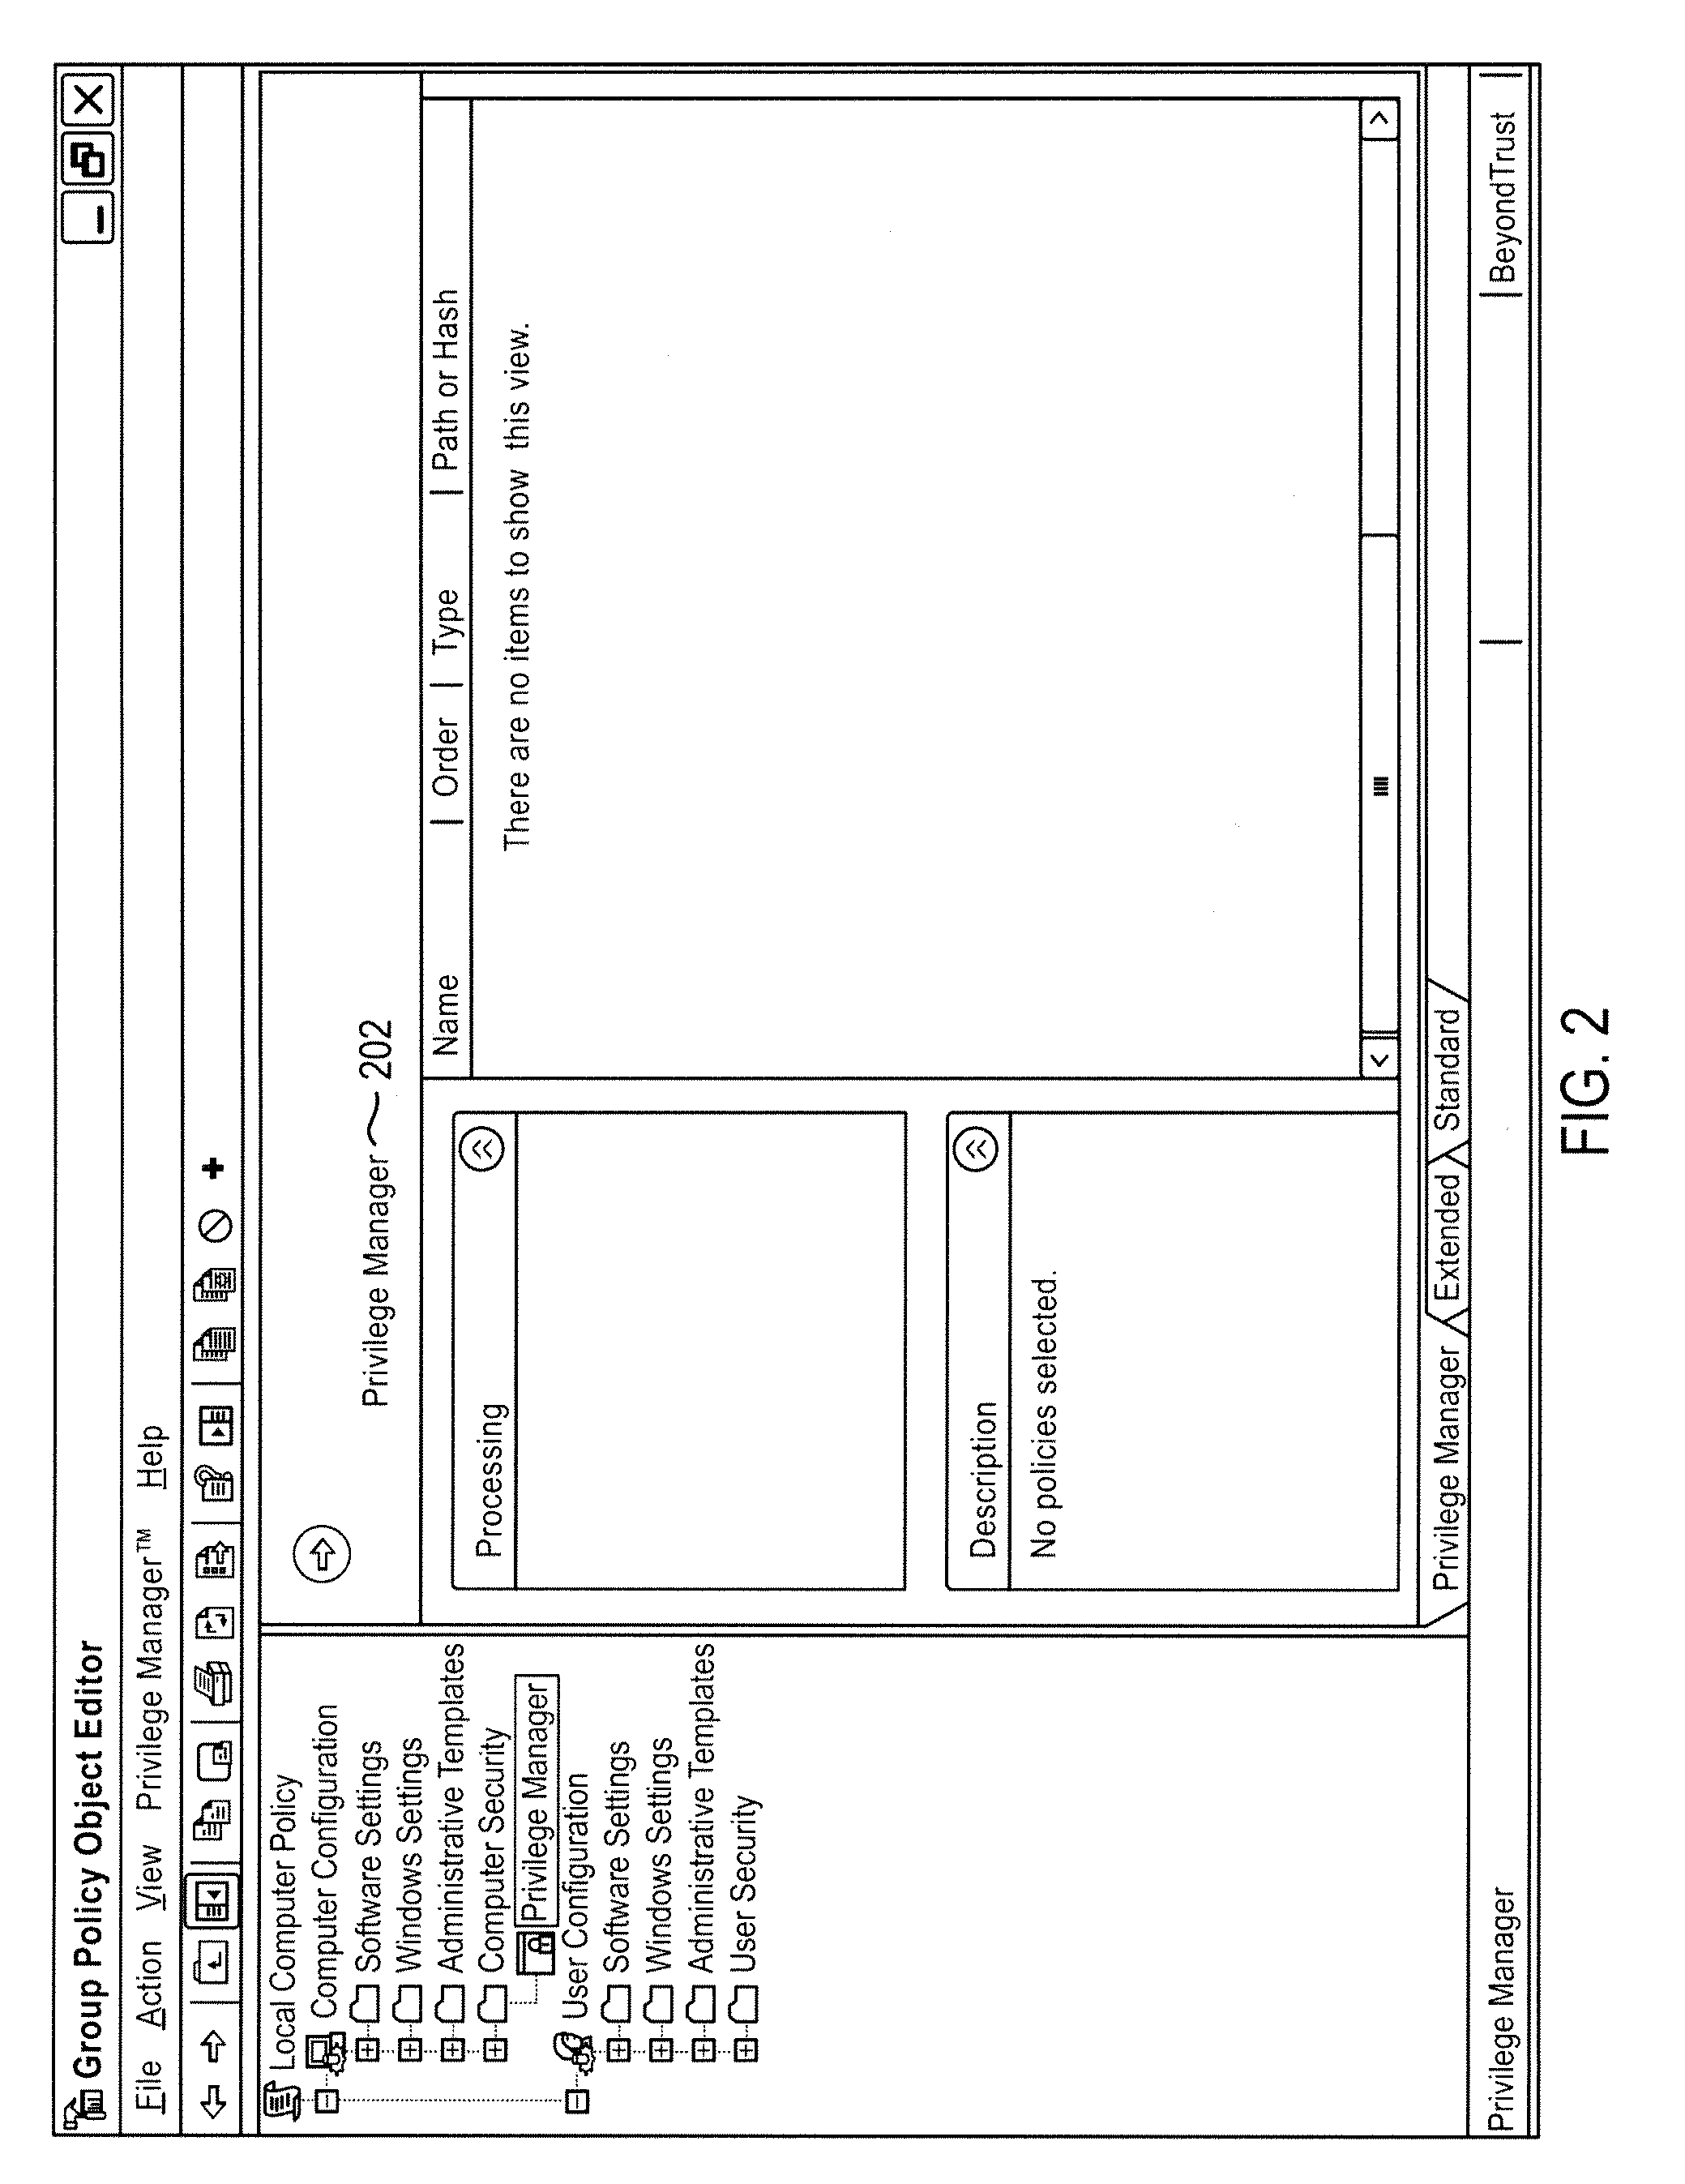 Methods and Systems for Controlling Access to Resources and Privileges Per Process